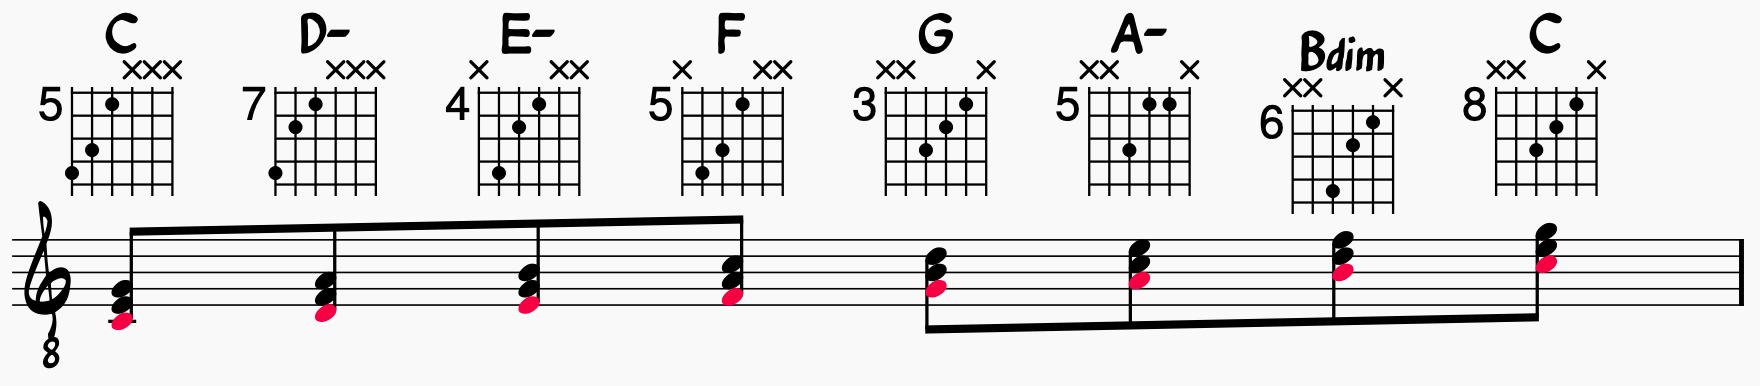 Chord Melody Basics: C major scale harmonized with fretboard diagrams and chord shapes moving across three string groups